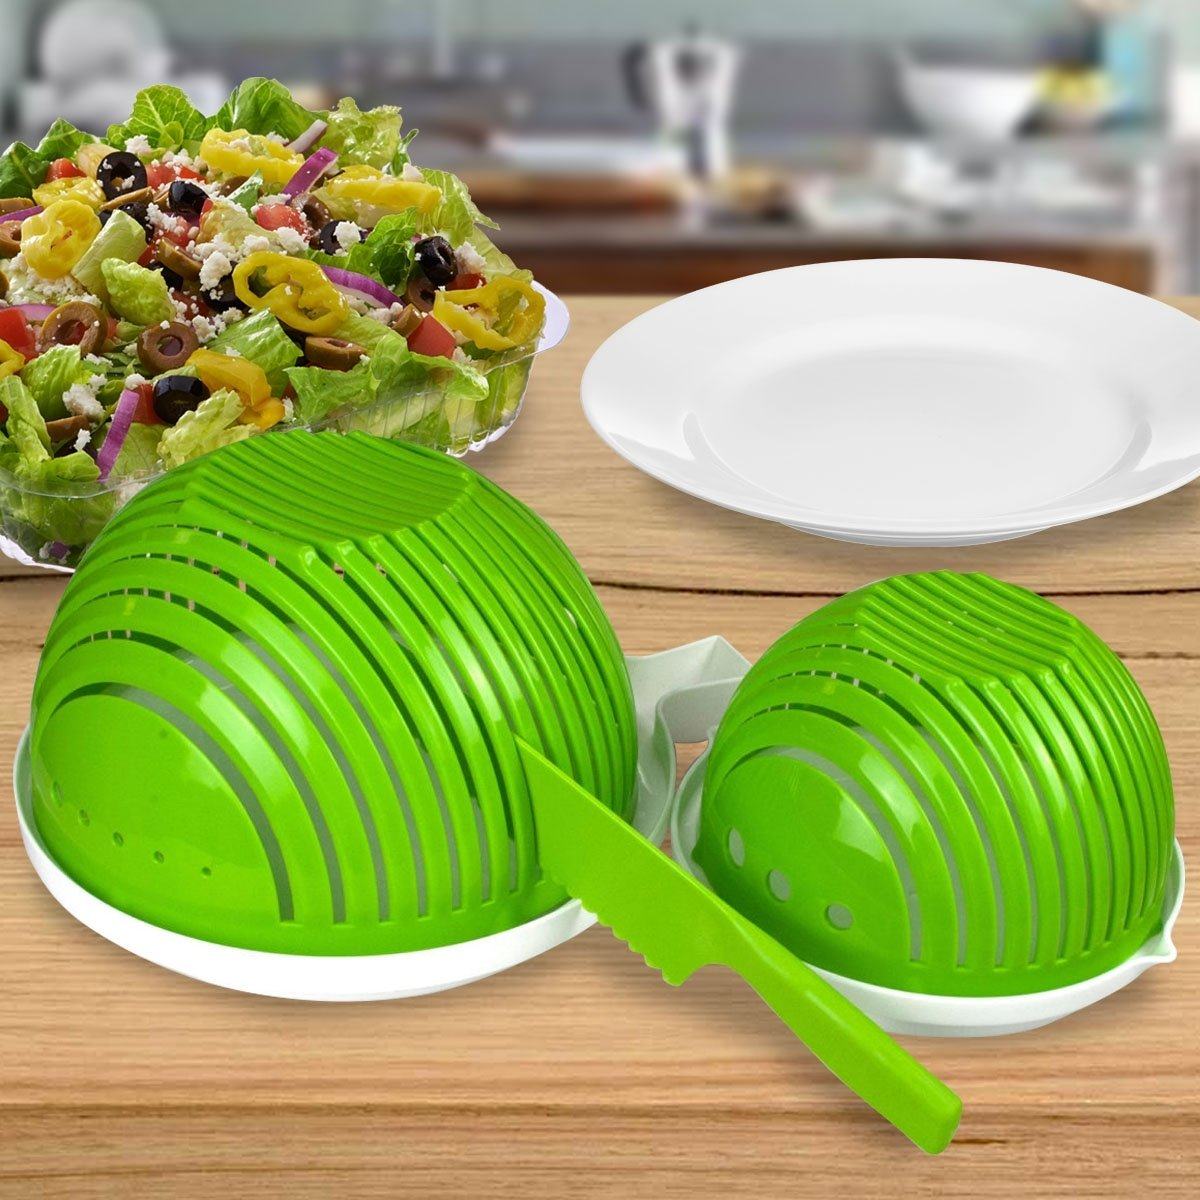 Chop Champ Set of Two Salad Cutter with Knife